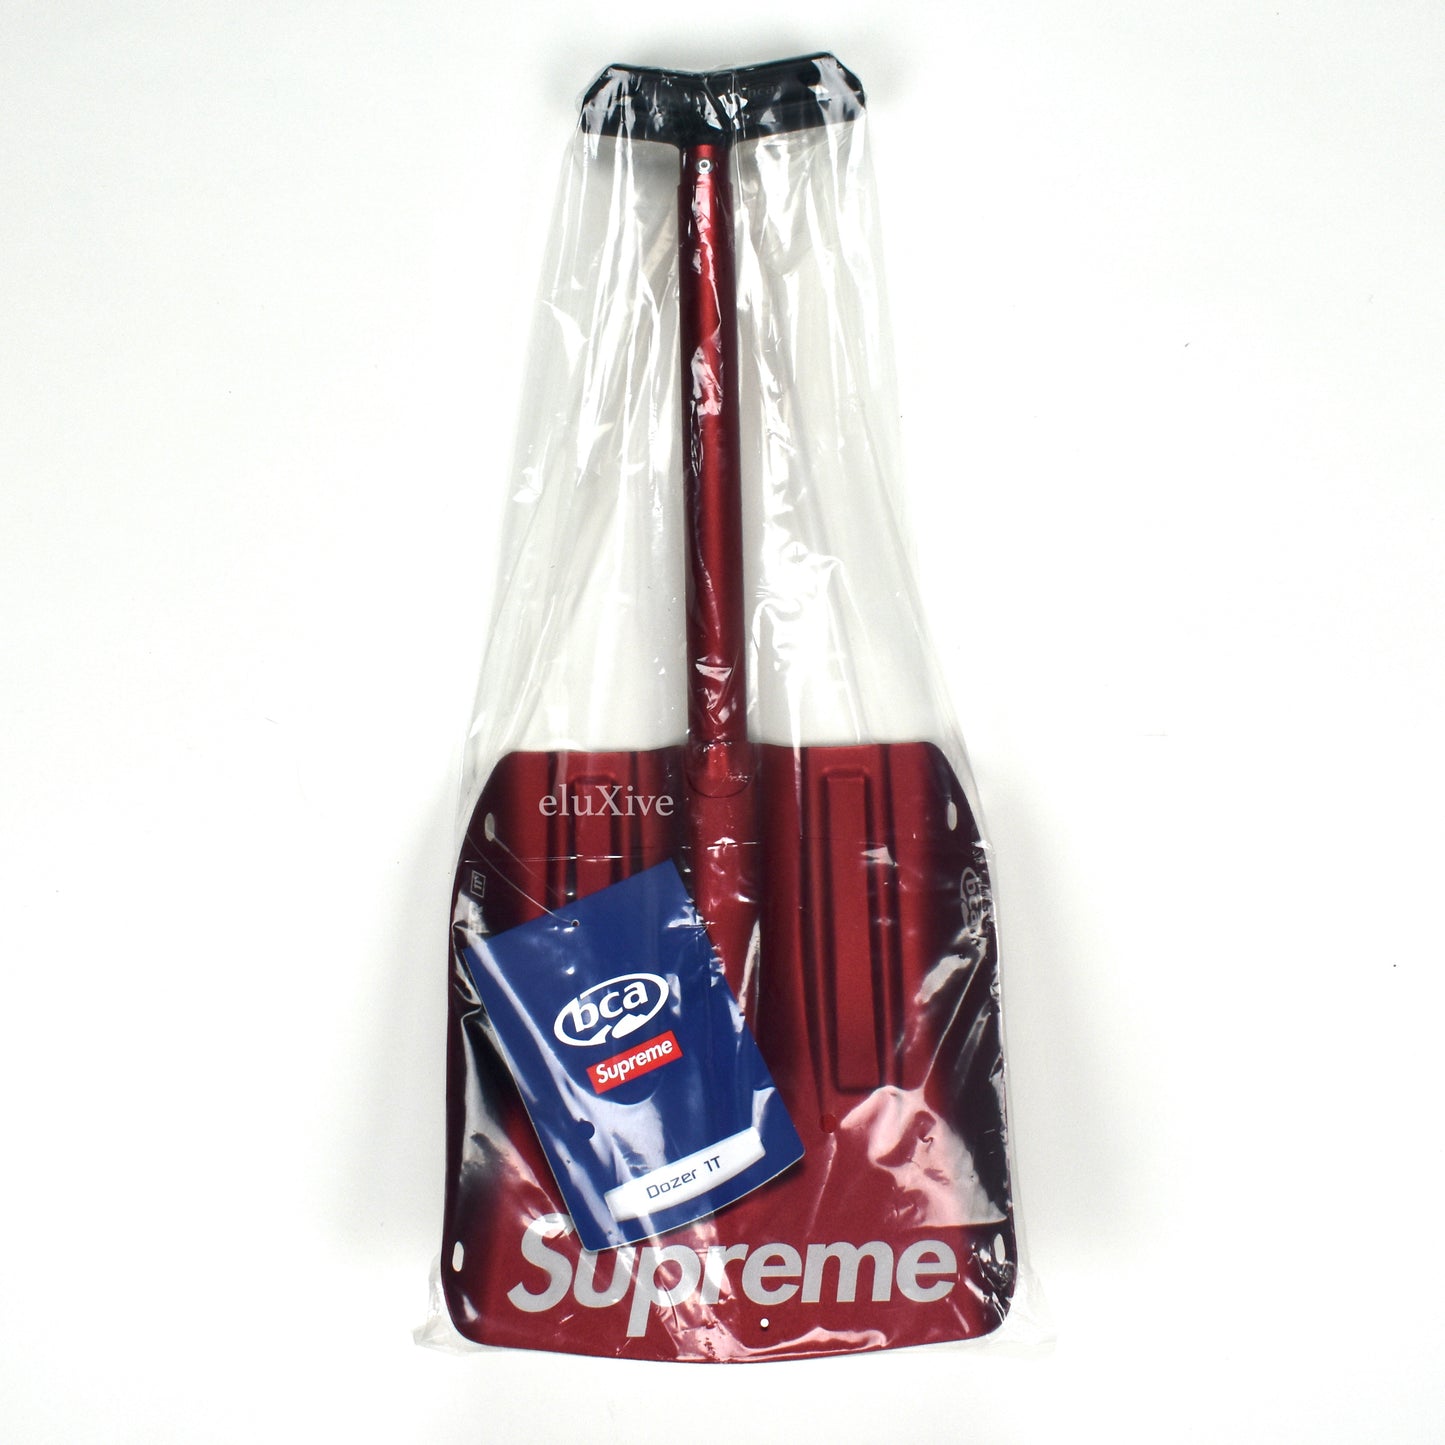 Supreme x Backcountry Access - Red Box Logo Collapsible Shovel